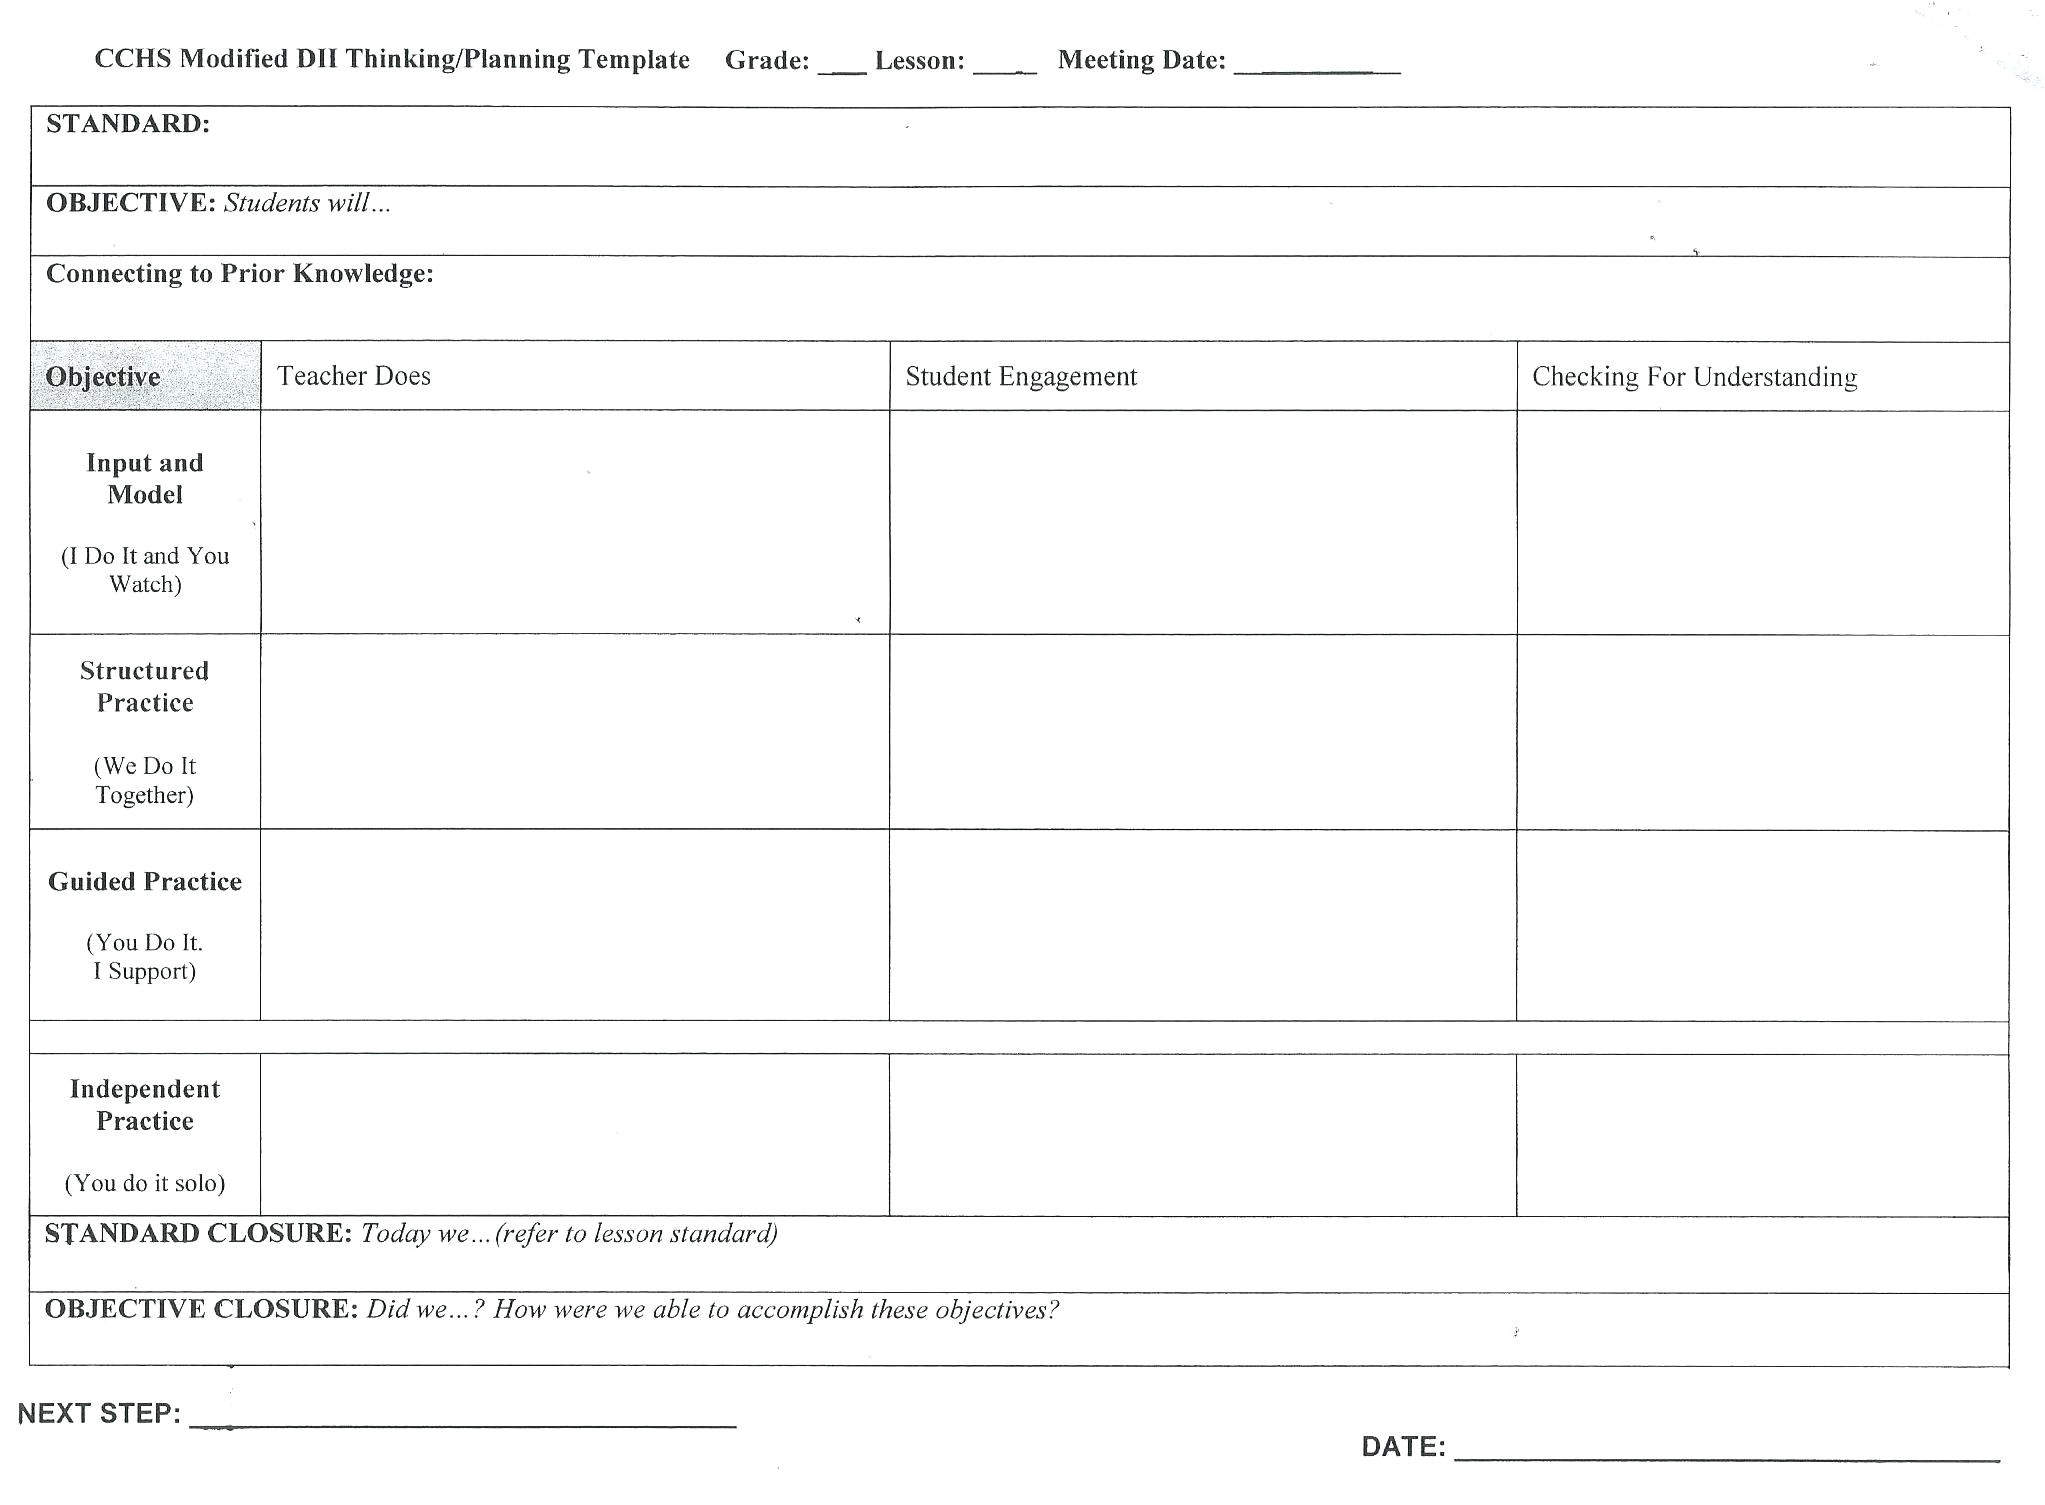 otes lesson plan template